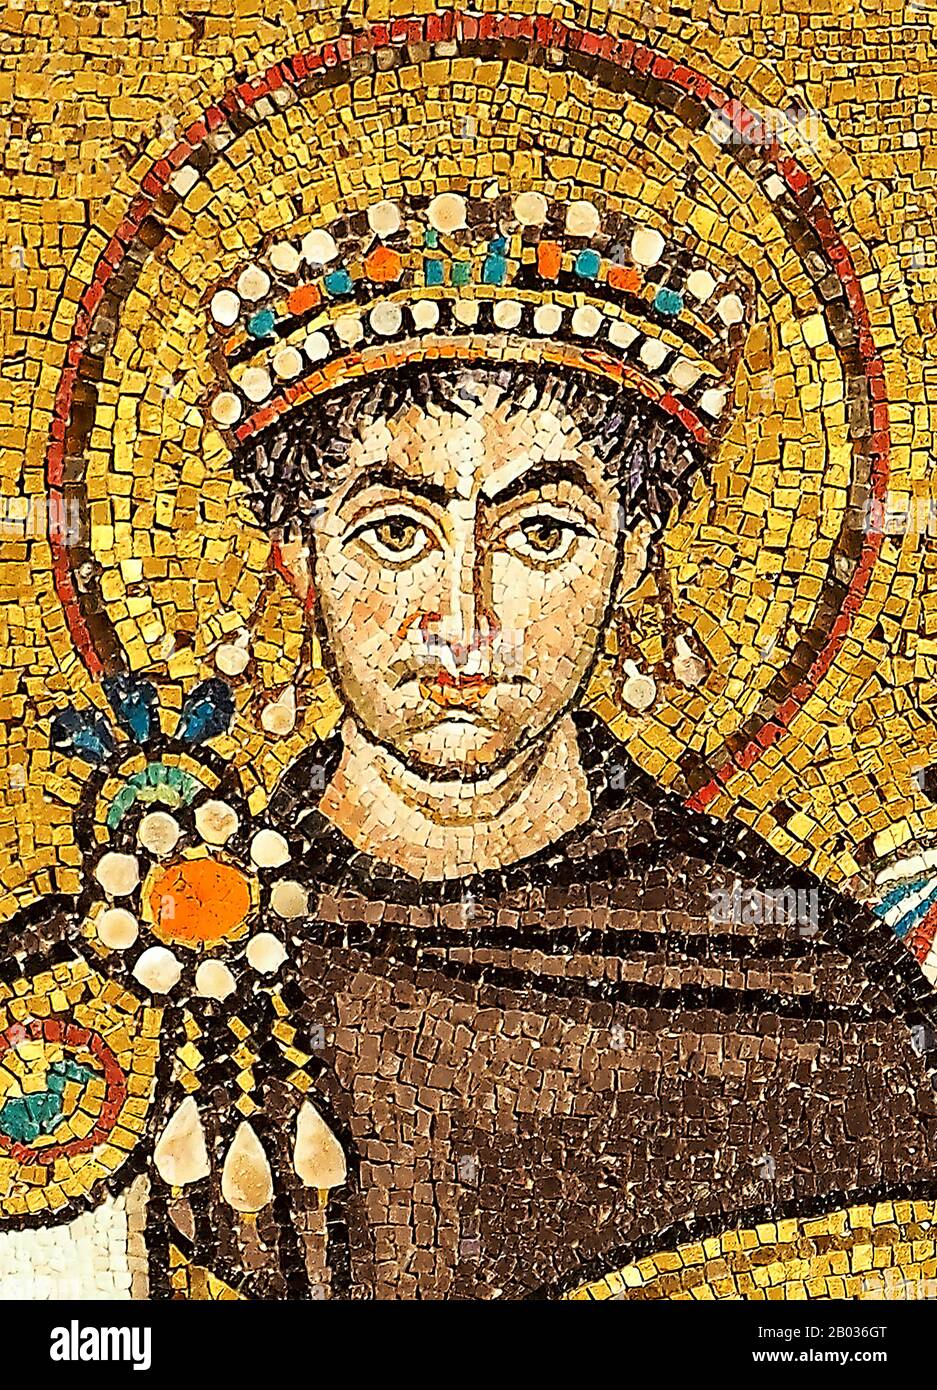 Justinian I (c. 482 – 14 November 565), traditionally known as Justinian the Great and also Saint Justinian the Great in the Eastern Orthodox Church, was Byzantine (Eastern Roman) emperor from 527 to 565.  During his reign, Justinian sought to revive the empire's greatness and reconquer the lost western half of the historical Roman Empire. His rule constitutes a distinct epoch in the history of the Later Roman empire, and his reign is marked by the ambitious but only partly realized restoration of the empire. Stock Photo